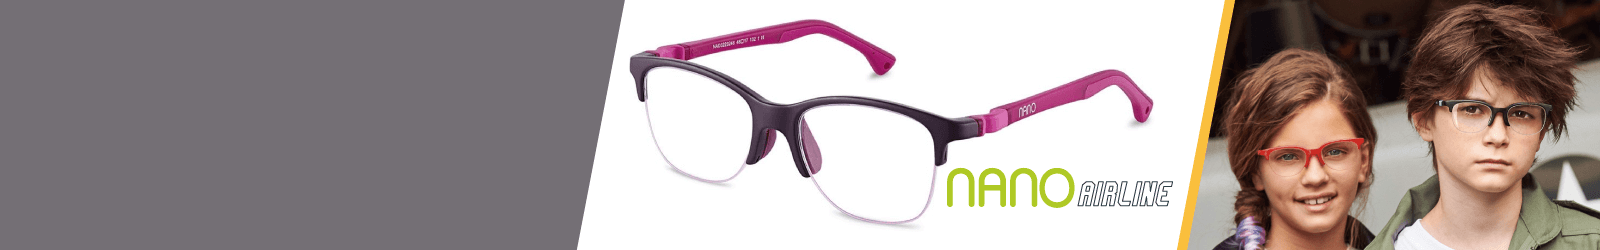 Nano Airline Kids Glasses from 8 to 10-year-old for Girls